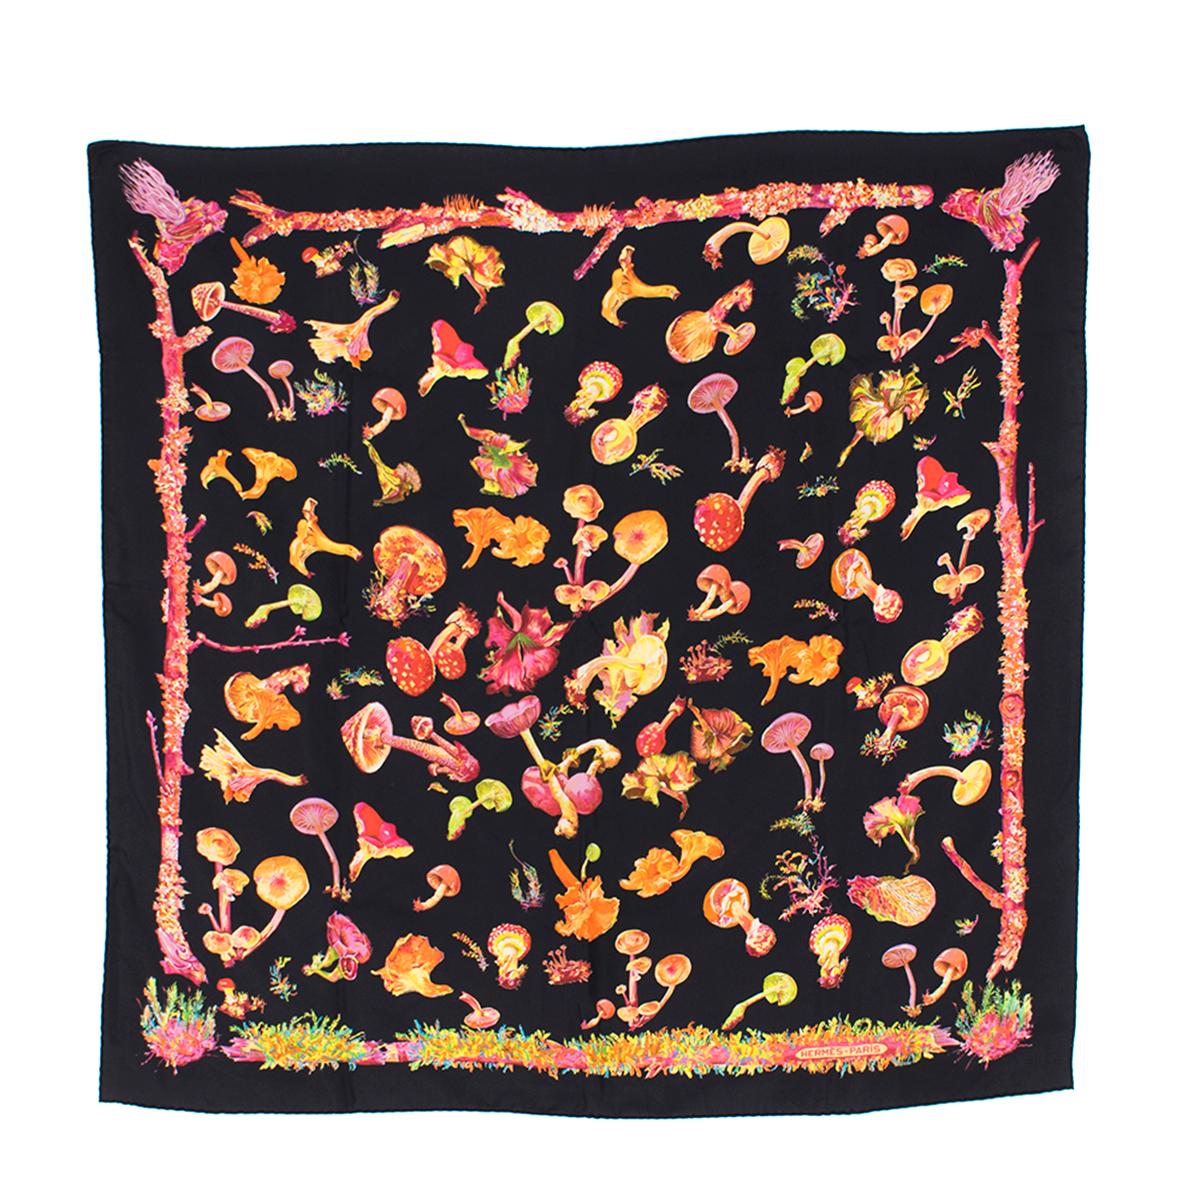 Hermes Black 'Champignons' Silk Scarf 

- Black Scarf 
- 100% Silk 
- 'Champignons' Mushroom themed print 
- Lightweight
- Rolled edges 

This item comes in an original box. 

Please note, these items are pre-owned and may show some signs of